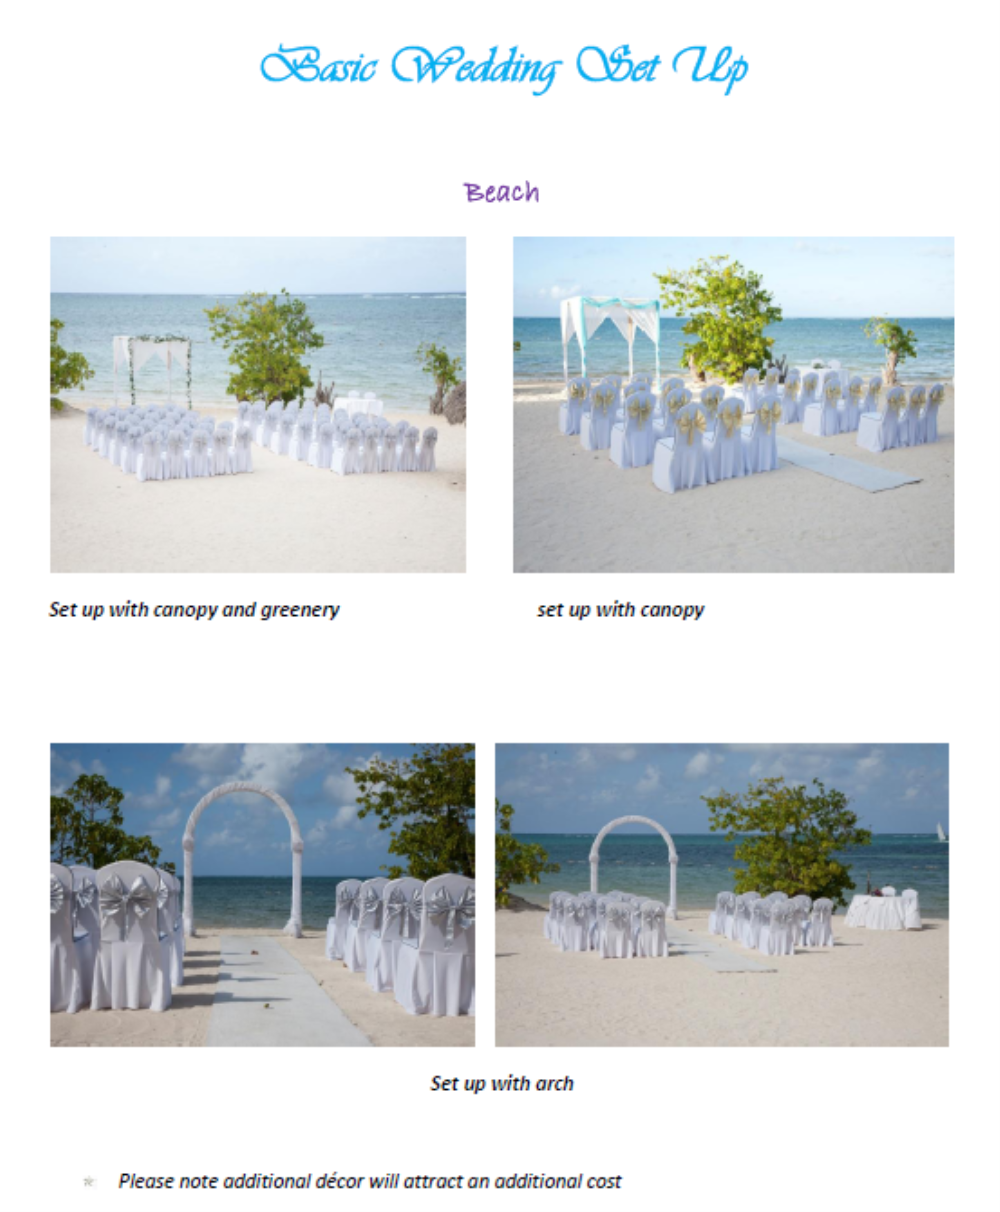 Iberostar Rose Hall Brides - Post all info/questions here!